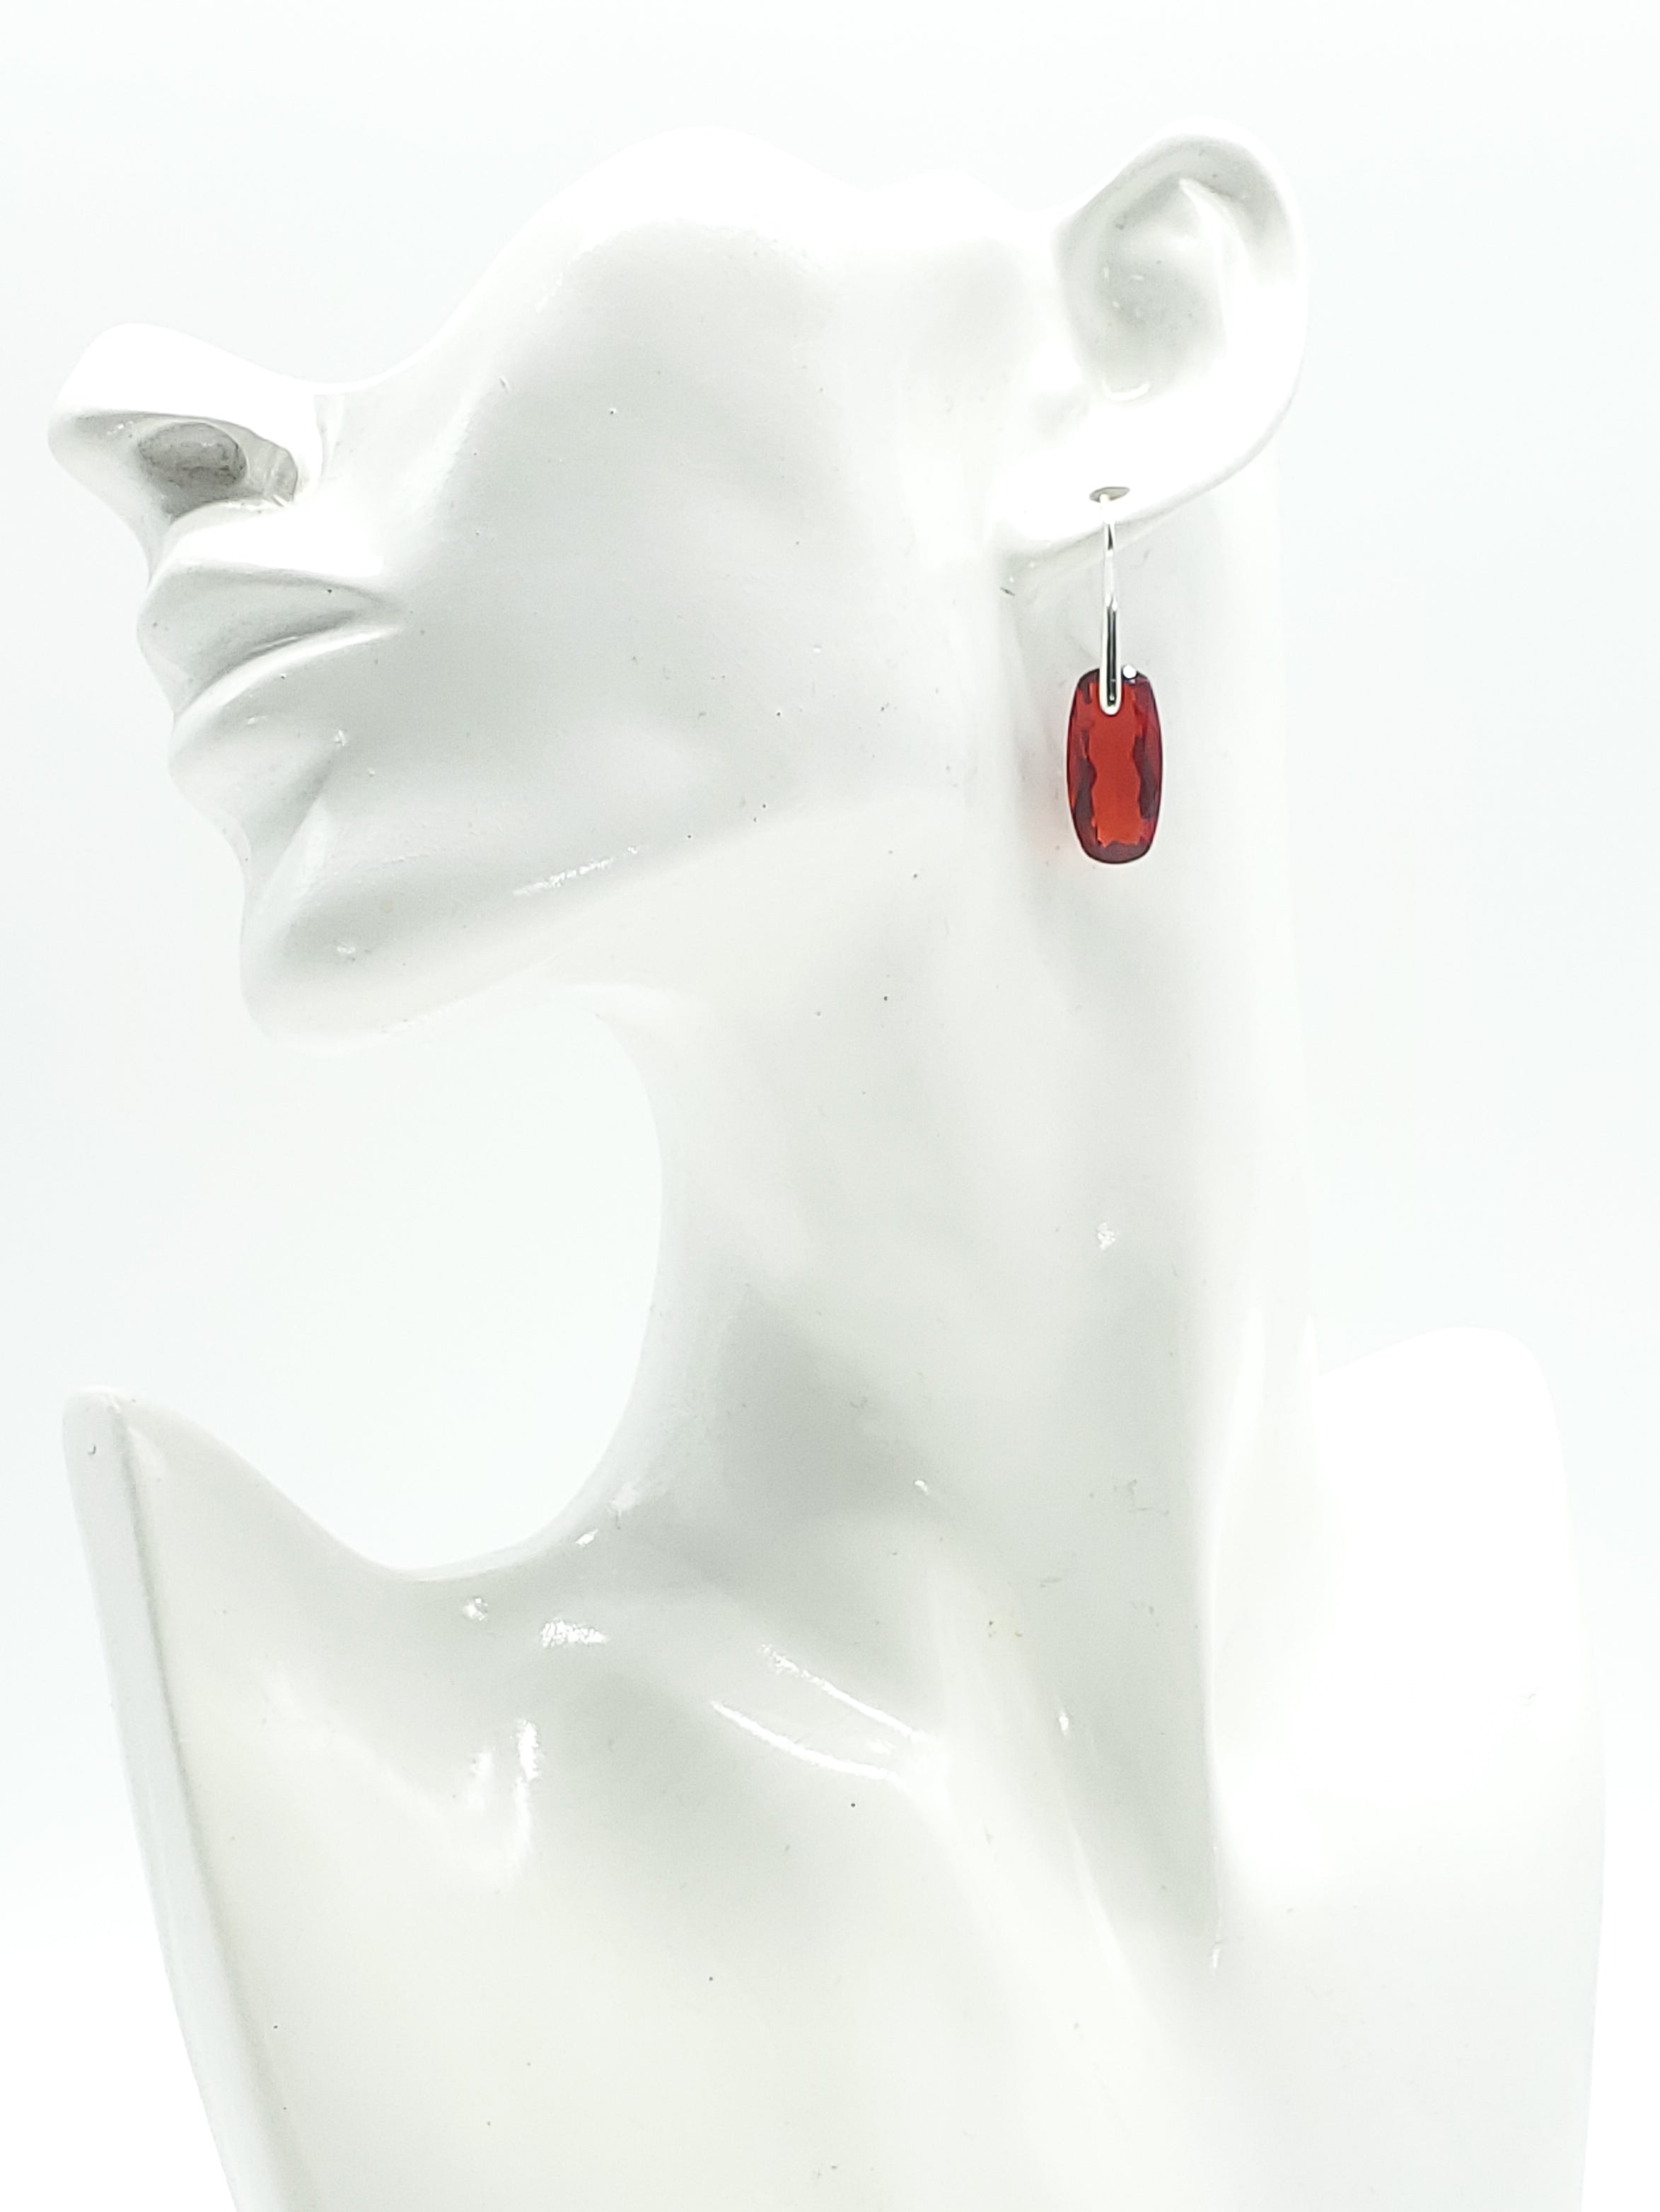 Cushion Cut Hydro Red Quartz Earrings on Sterling Silver Ear Wires - The Caffeinated Raven